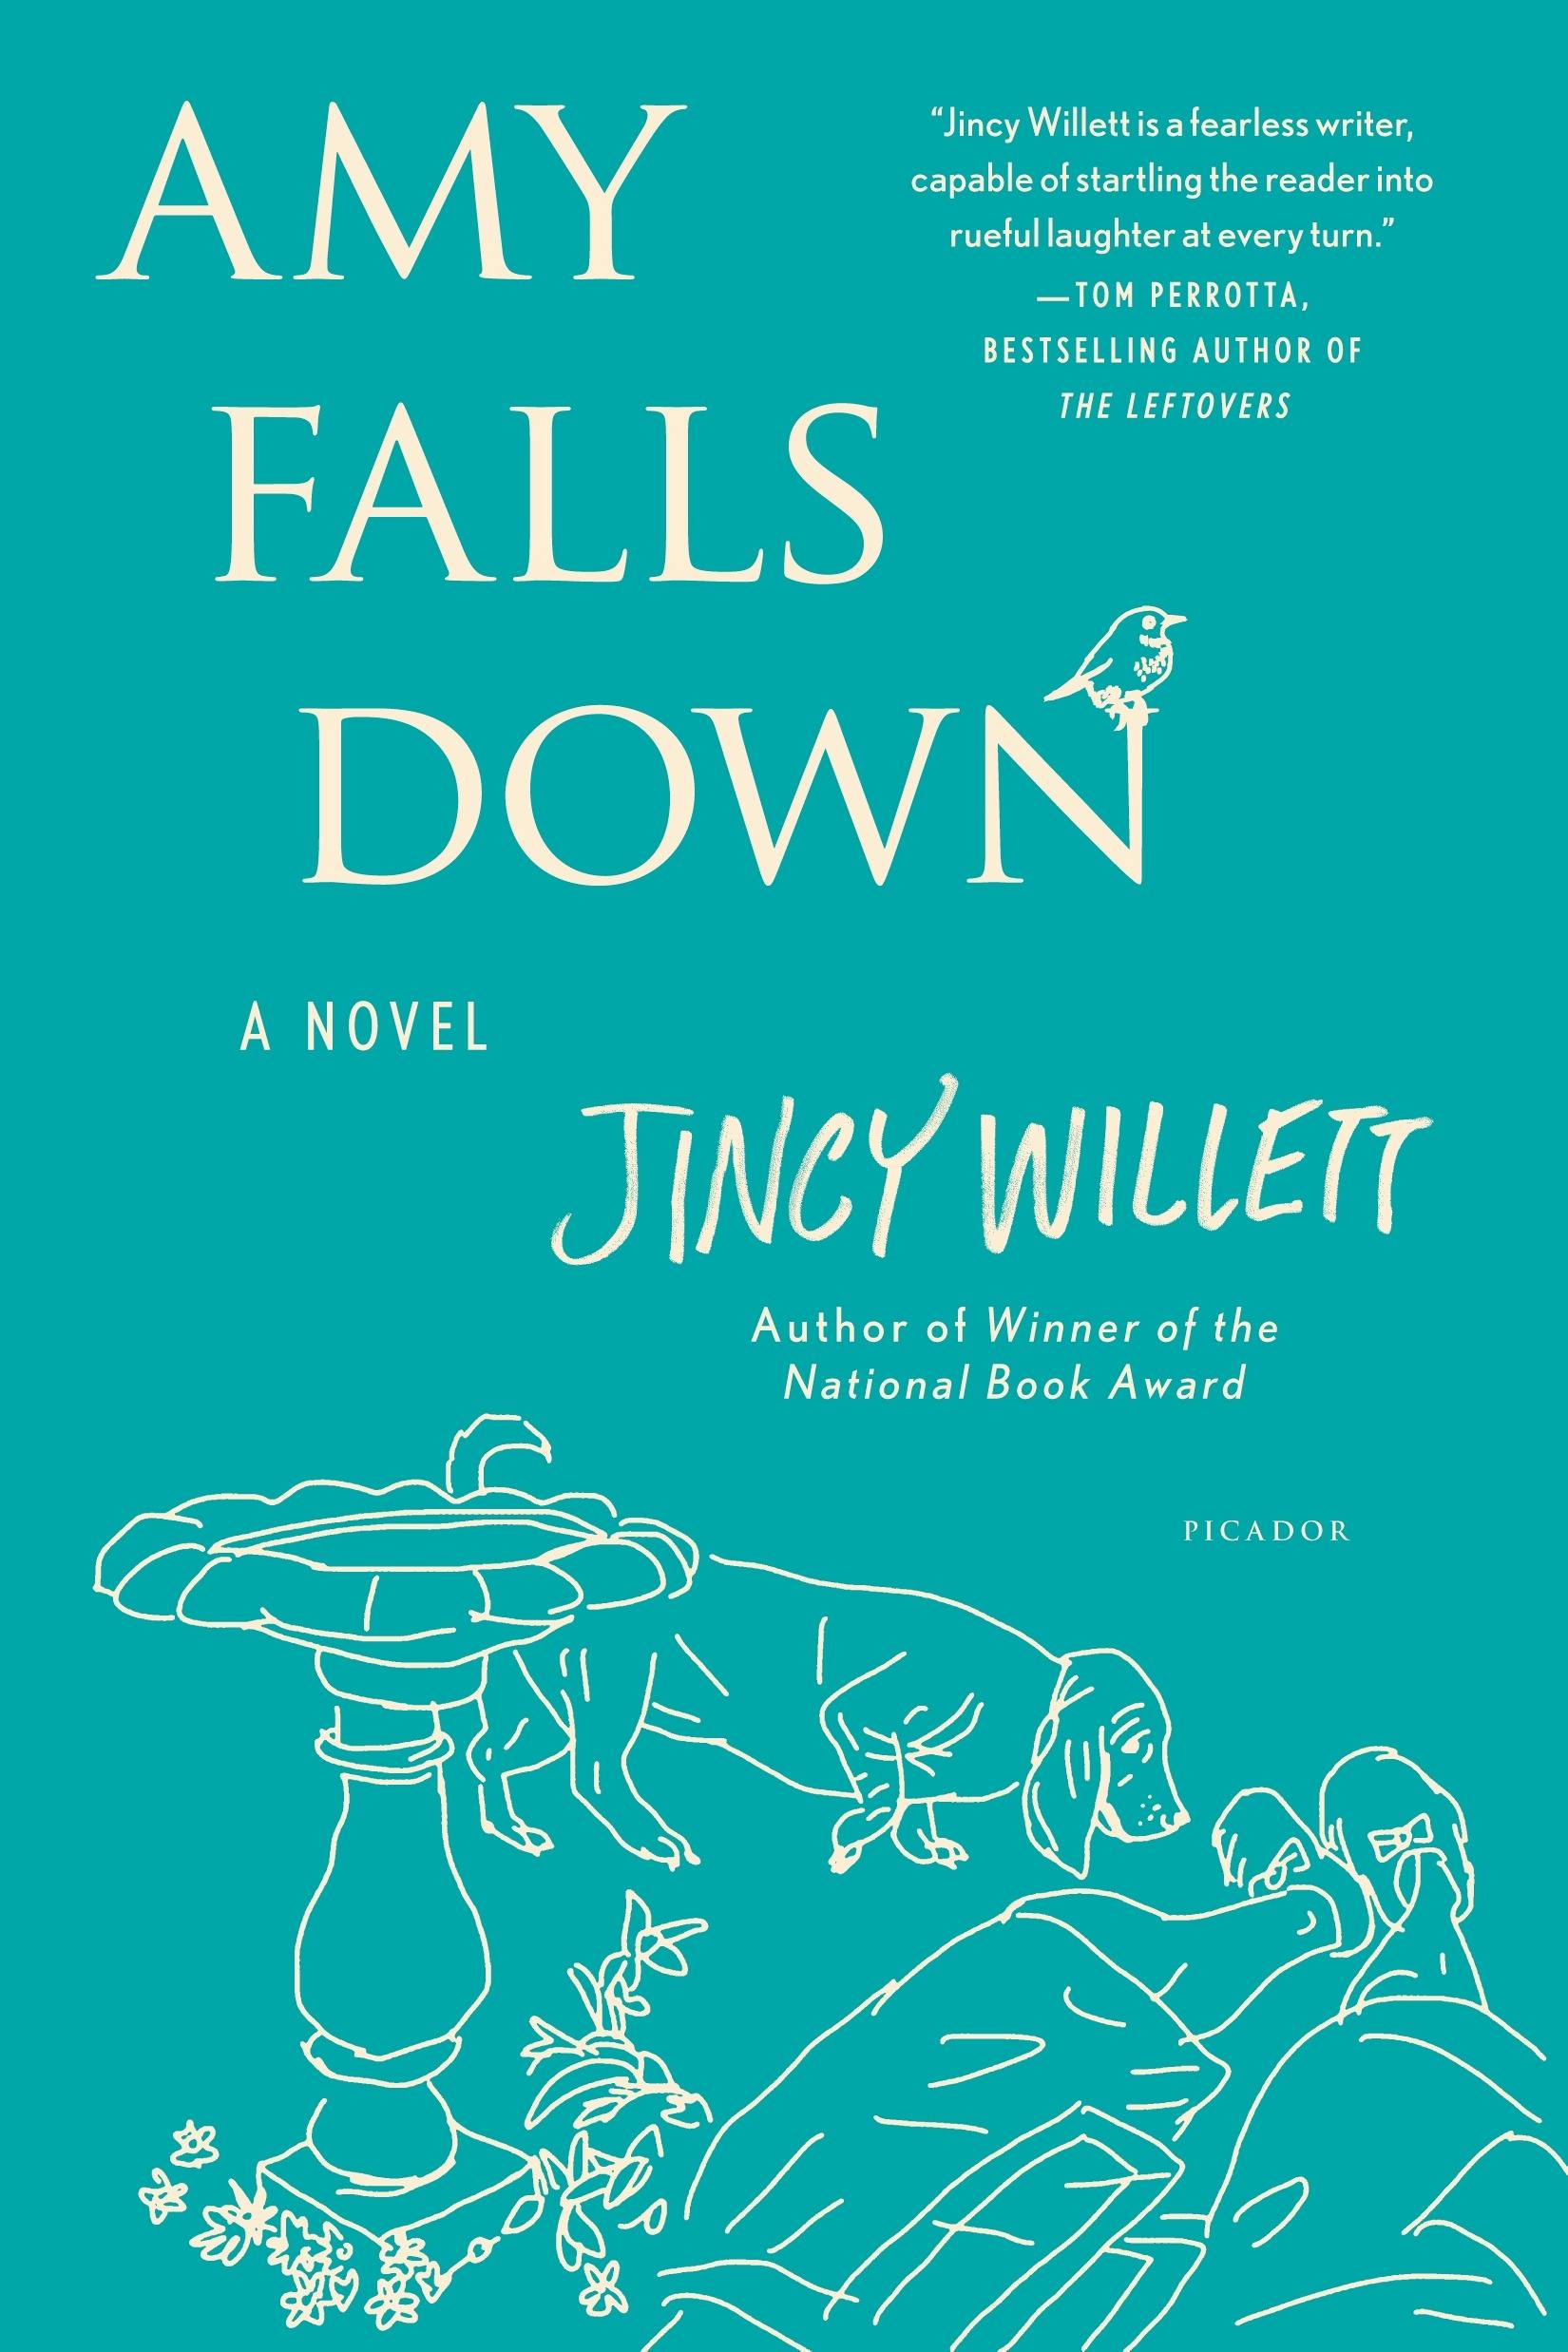 Image of Amy Falls Down